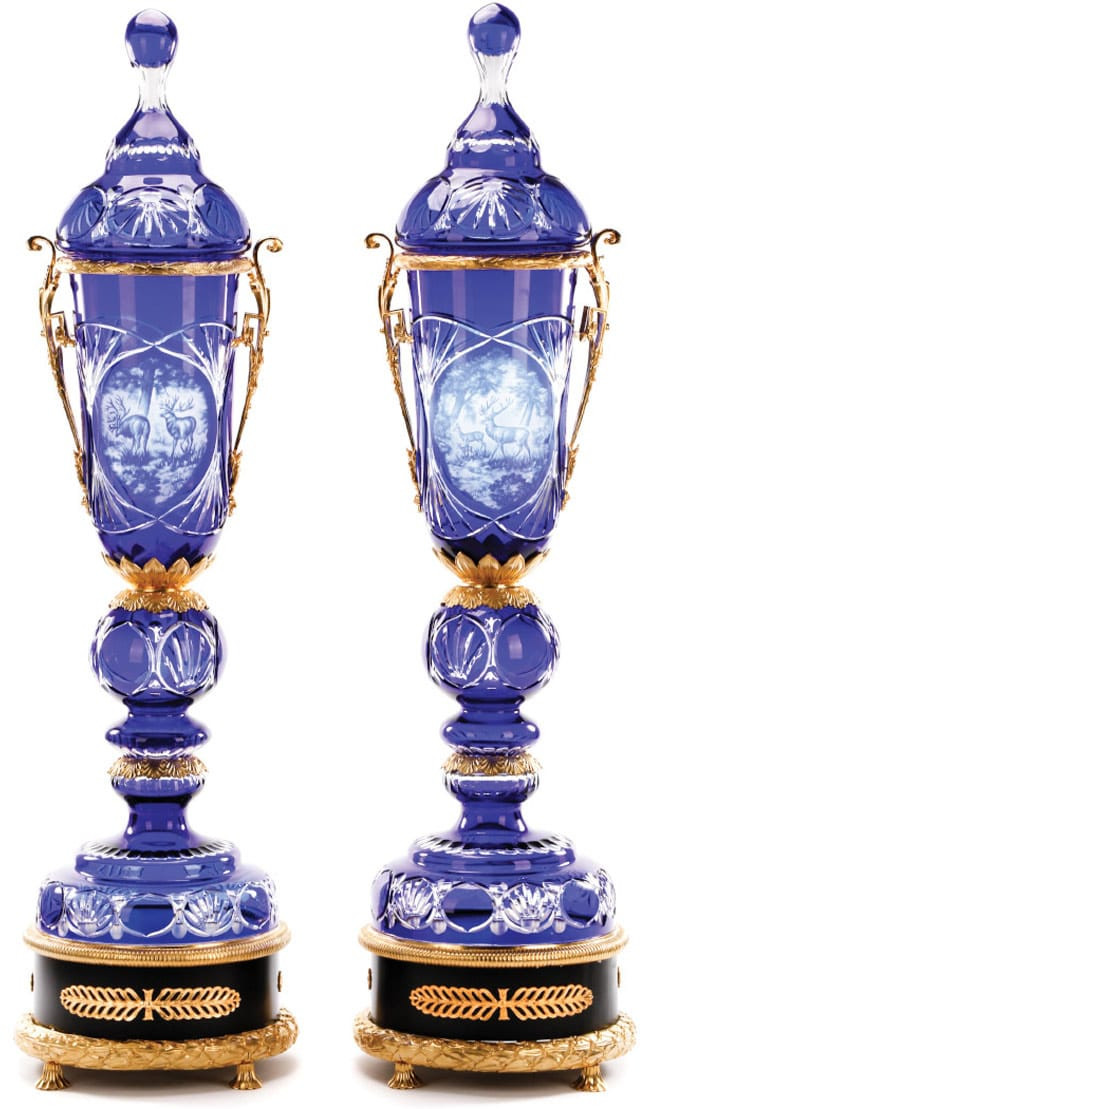 22 Spectacular Daum Nancy Vase Prices 2024 free download daum nancy vase prices of glass crystal regarding palatial dore bronze mounted crystal floor urns ahlers ogletree auction gallery